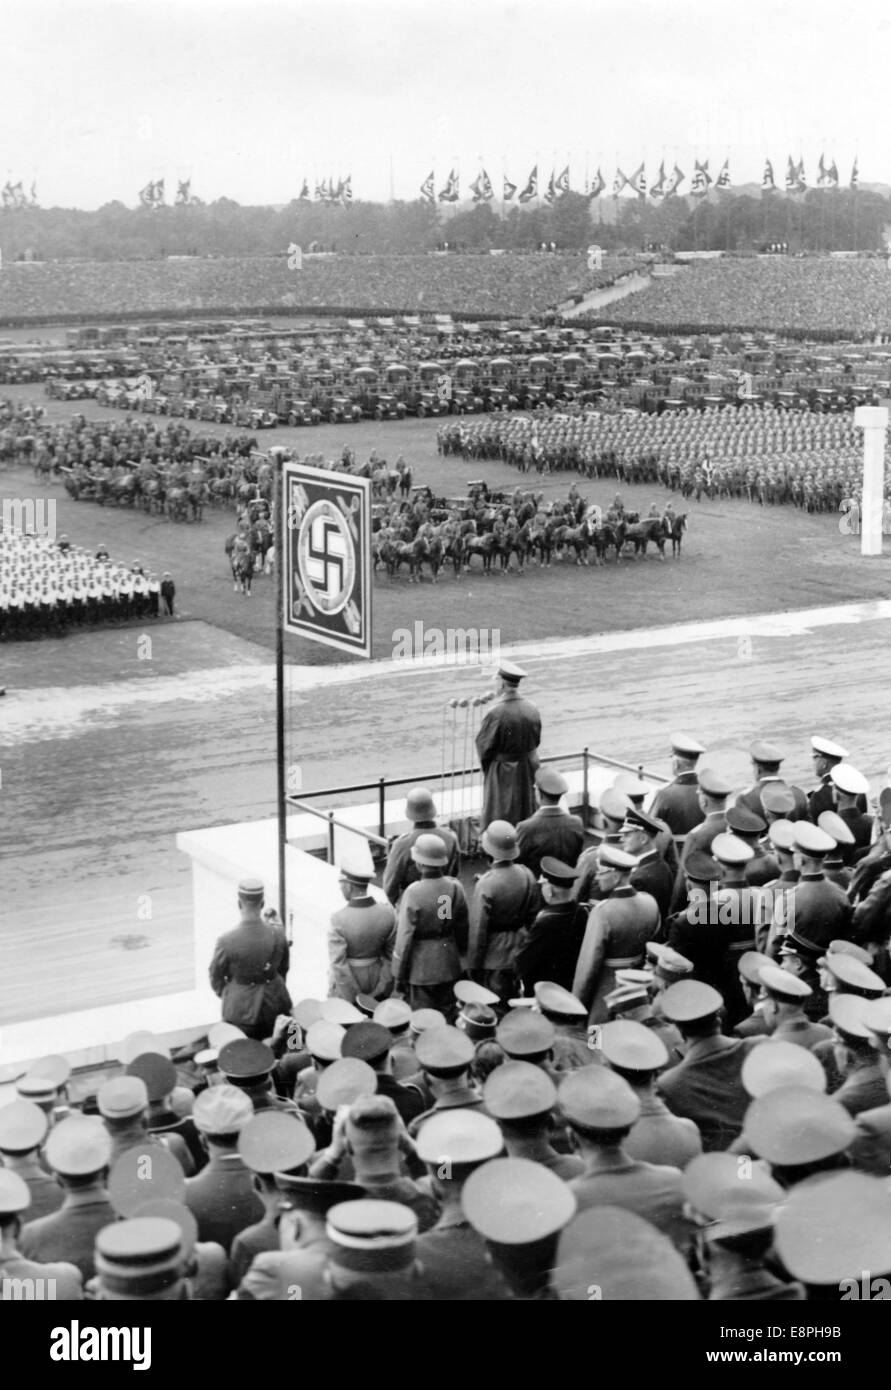 Nuremberg Rally 1937 in Nuremberg, Germany - Nazi party rally grounds - Demonstration by the Nazi armed forces (Wehrmacht) on Zeppelin Field, here speech by Adolf Hitler. On the right behind Hitler: Minister of War General Field Marshal Werner von Blomberg. (Flaws in quality due to the historic picture copy) Fotoarchiv für Zeitgeschichtee - NO WIRE SERVICE - Stock Photo